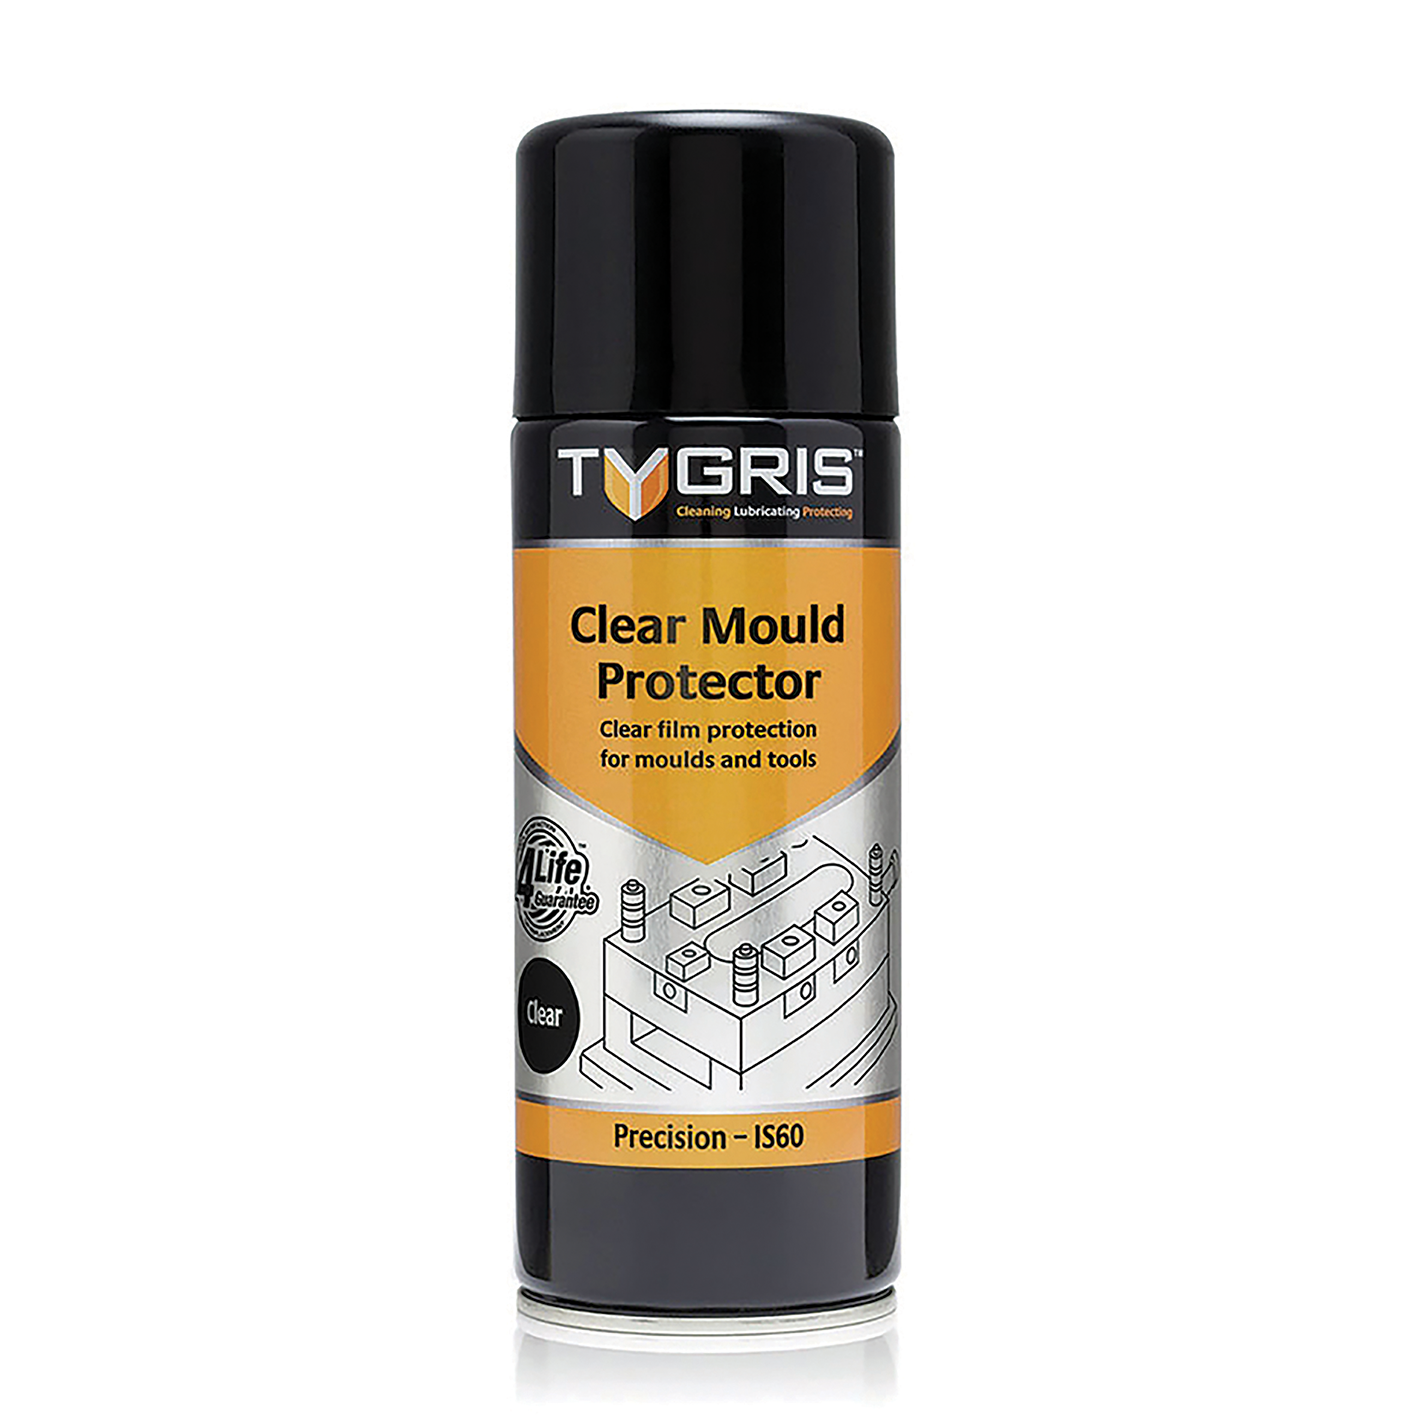 CLEAR MOULD PROTECTOR